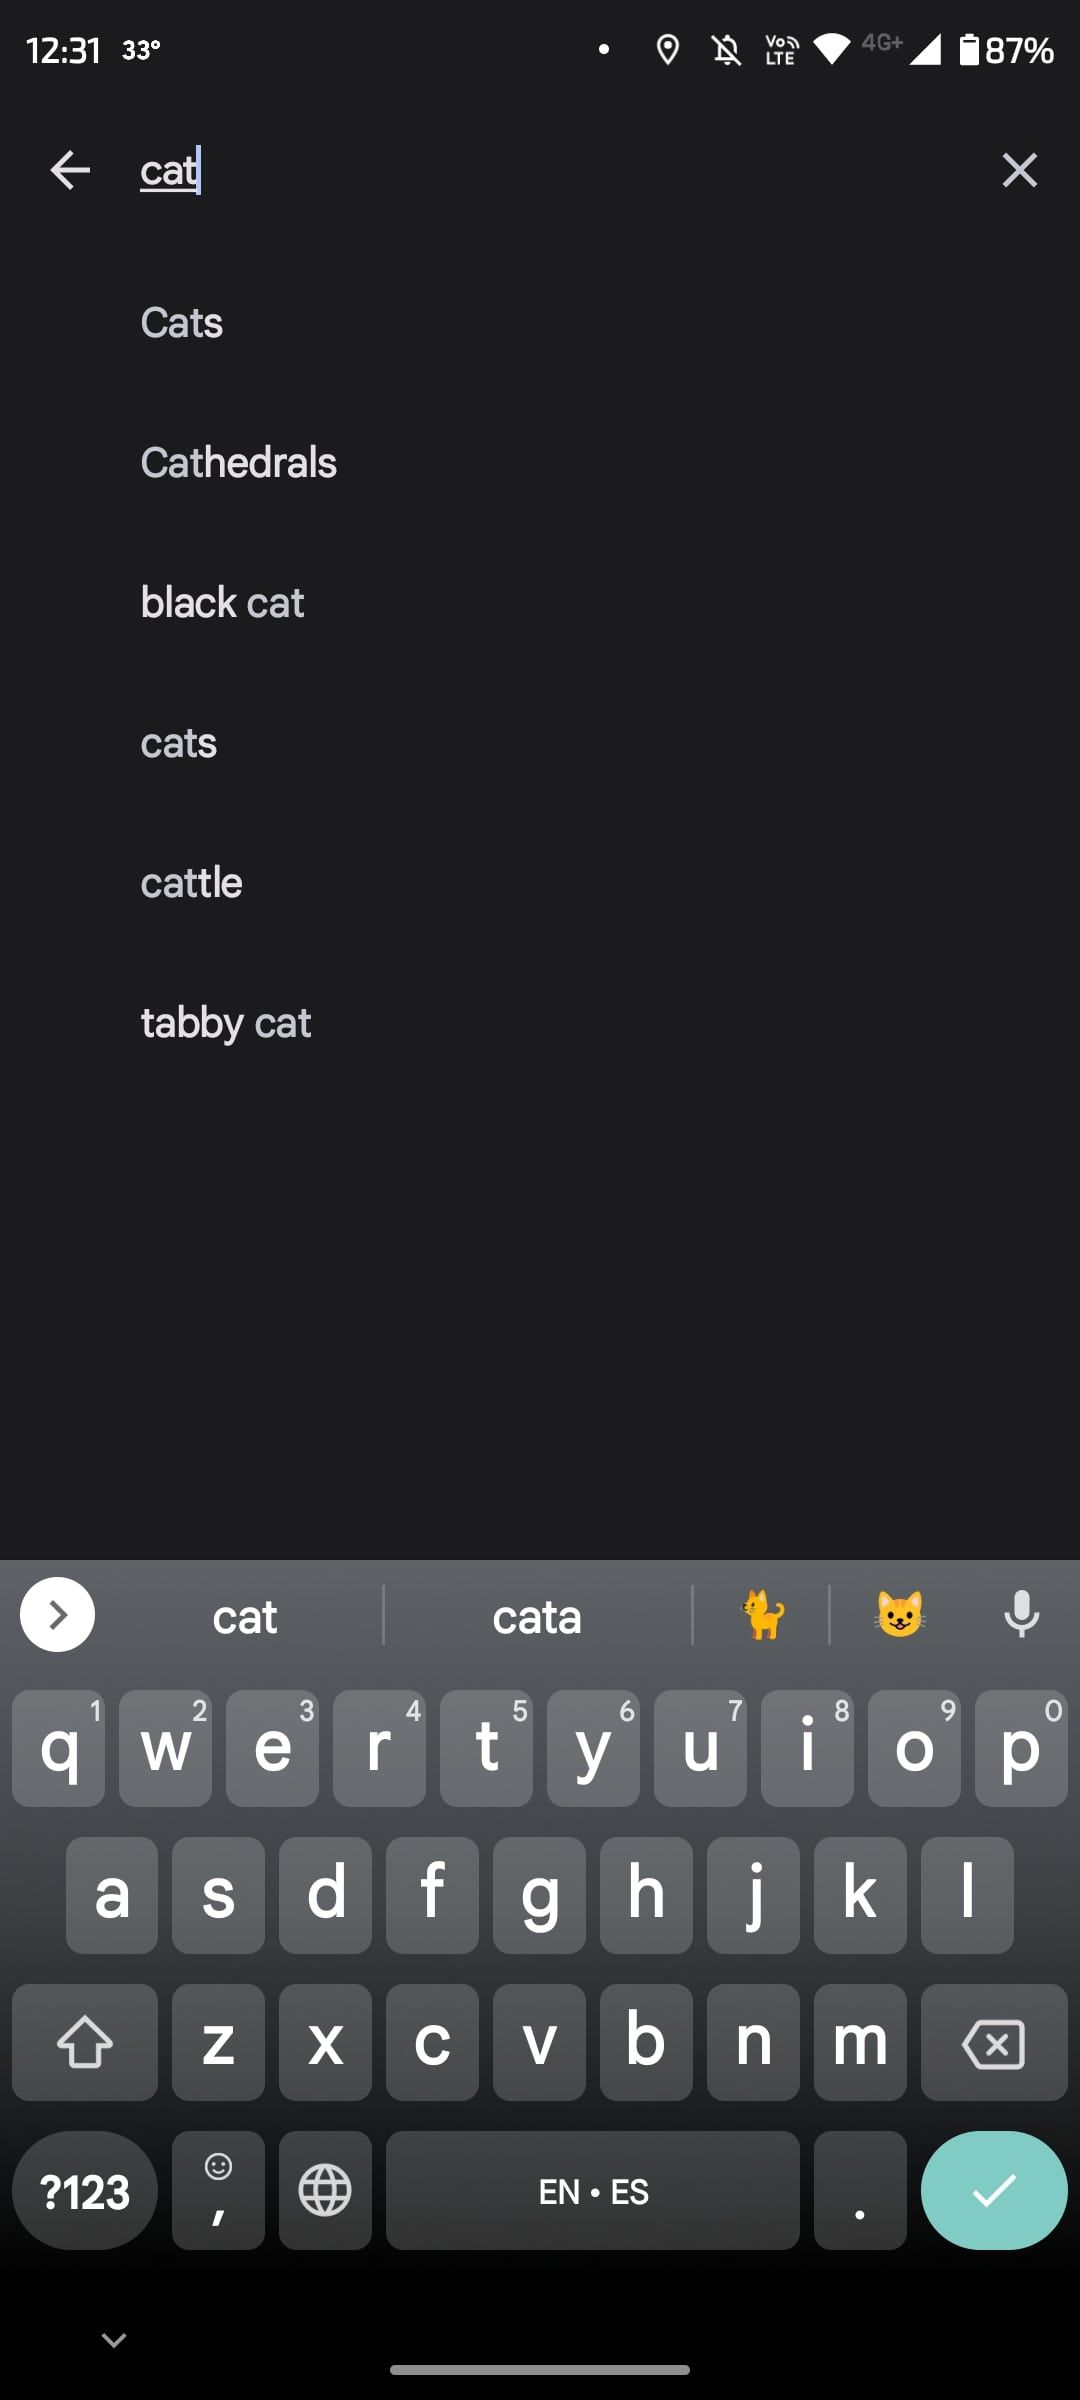 Search bar with cat as text and recommendations